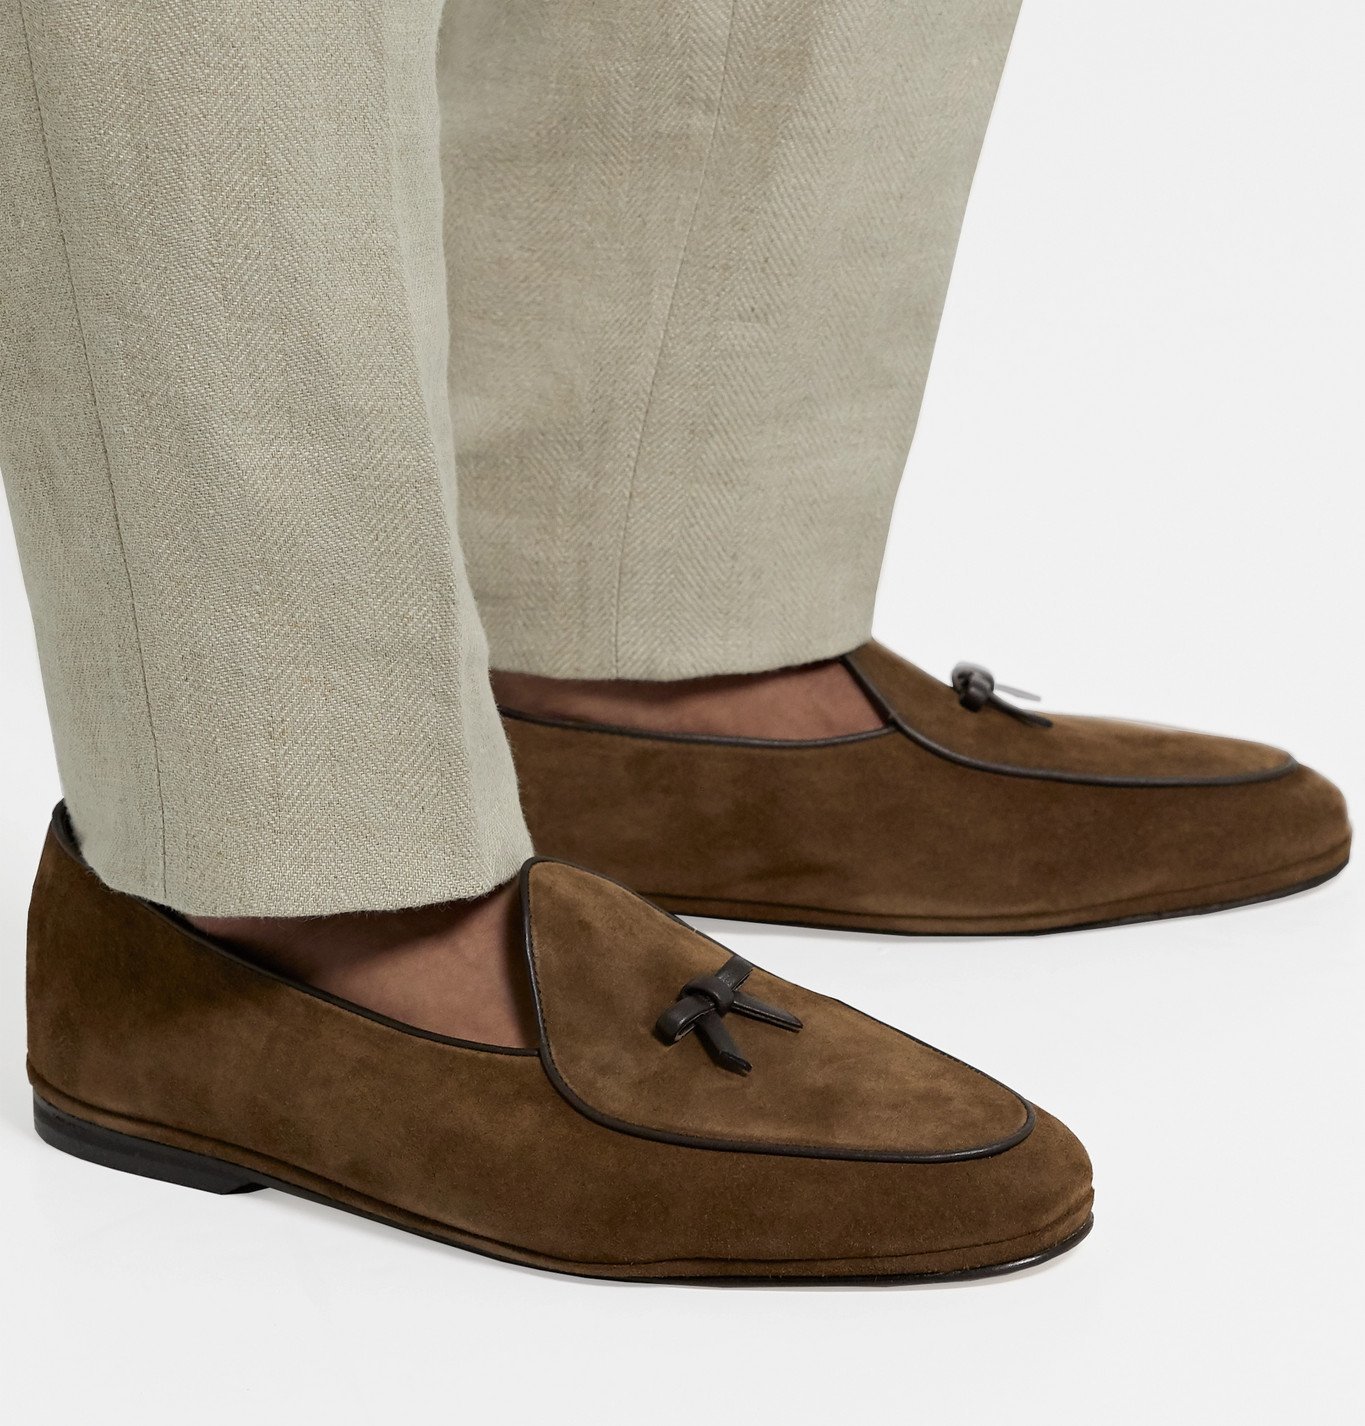 Rubinacci - Marphy Leather-Trimmed Suede Tasselled Loafers - Brown ...